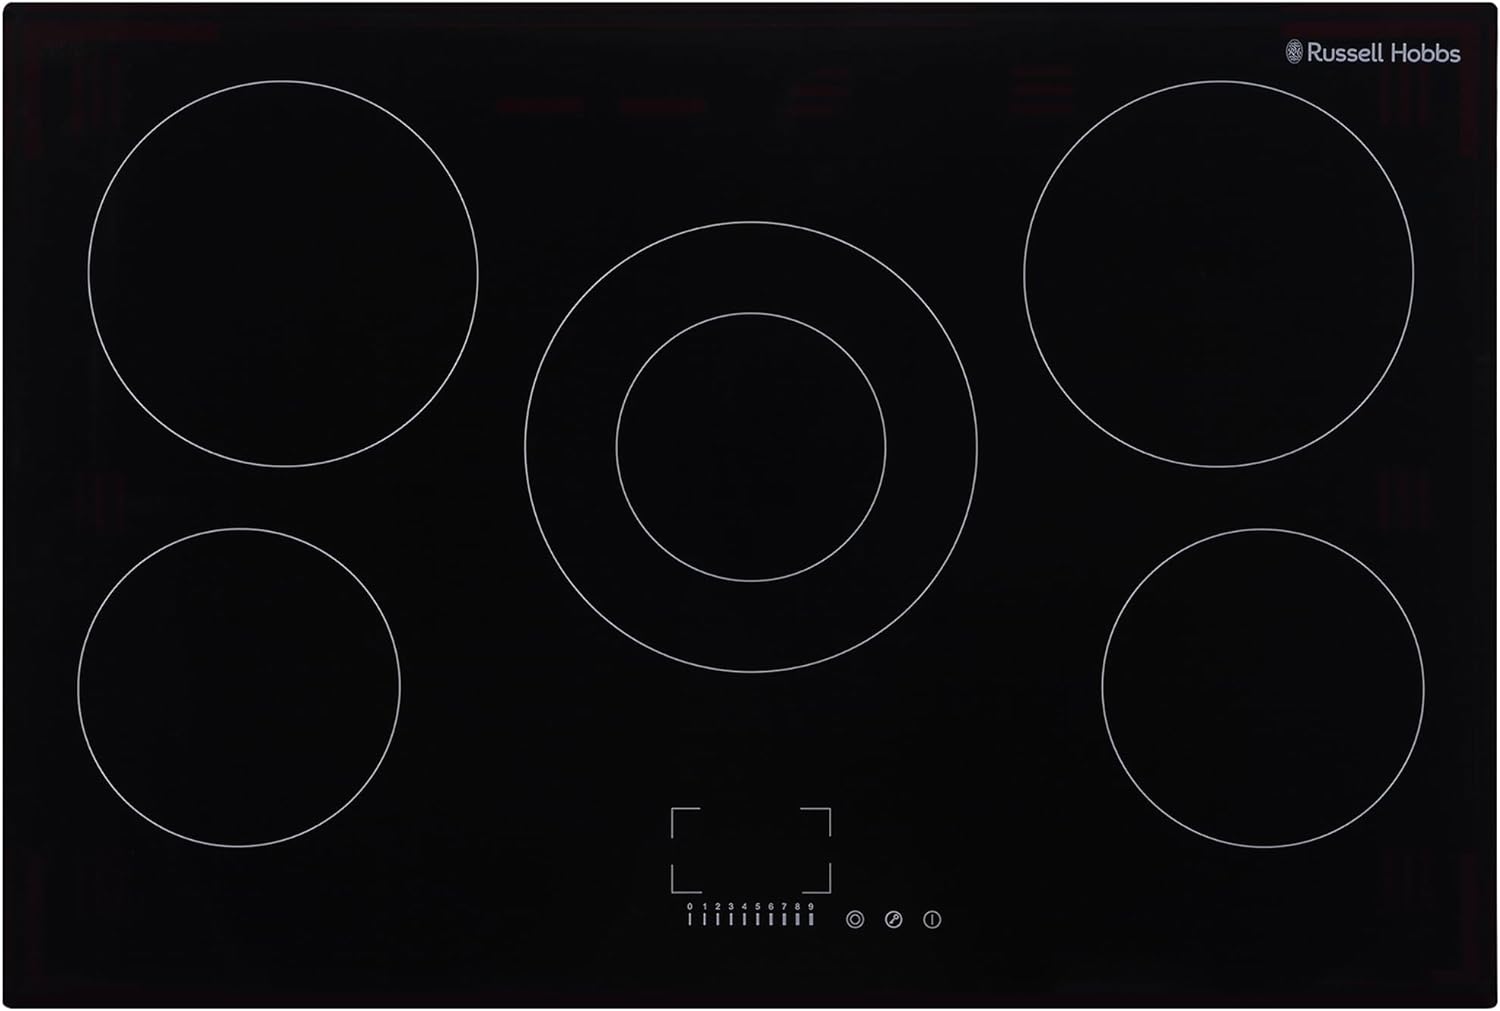 Russell Hobbs Electric Hob 77 cm Ceramic Cooktop with 5 Cooking Zones, Touch Contrtol & Easy Clean, Safety Cut Off, Integrated Timer & 2 Rapid Zones RH77EH6011, 2 Year Guarantee,Black,Medium - Amazing Gadgets Outlet